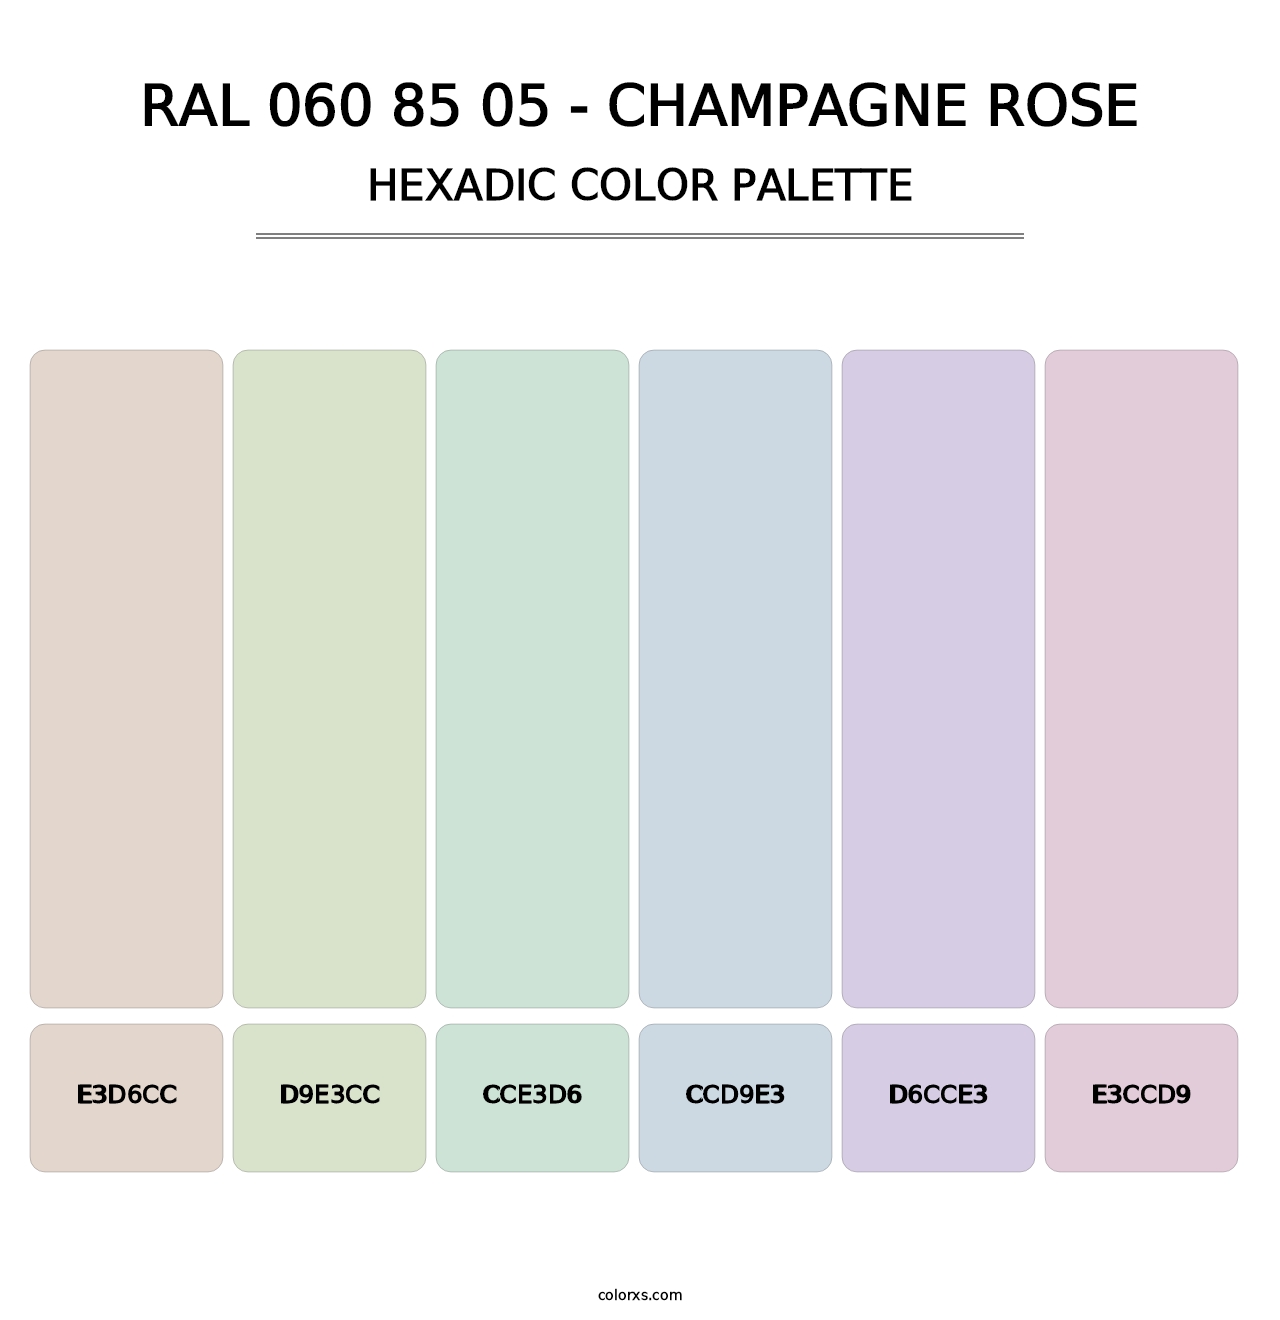 RAL 060 85 05 - Champagne Rose - Hexadic Color Palette